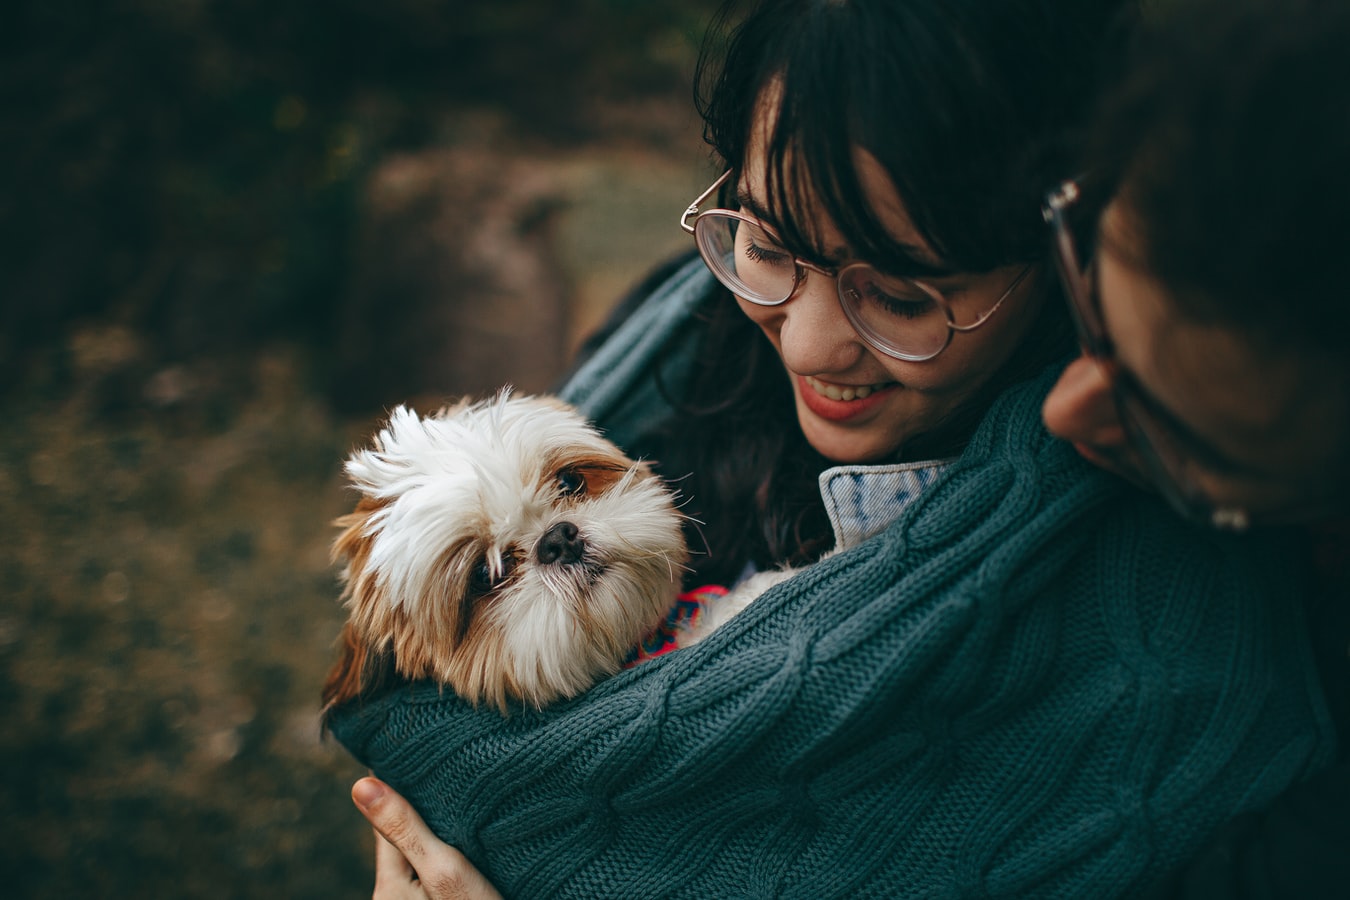 Caring for Your Dog: 5 Ways to Show Them Love